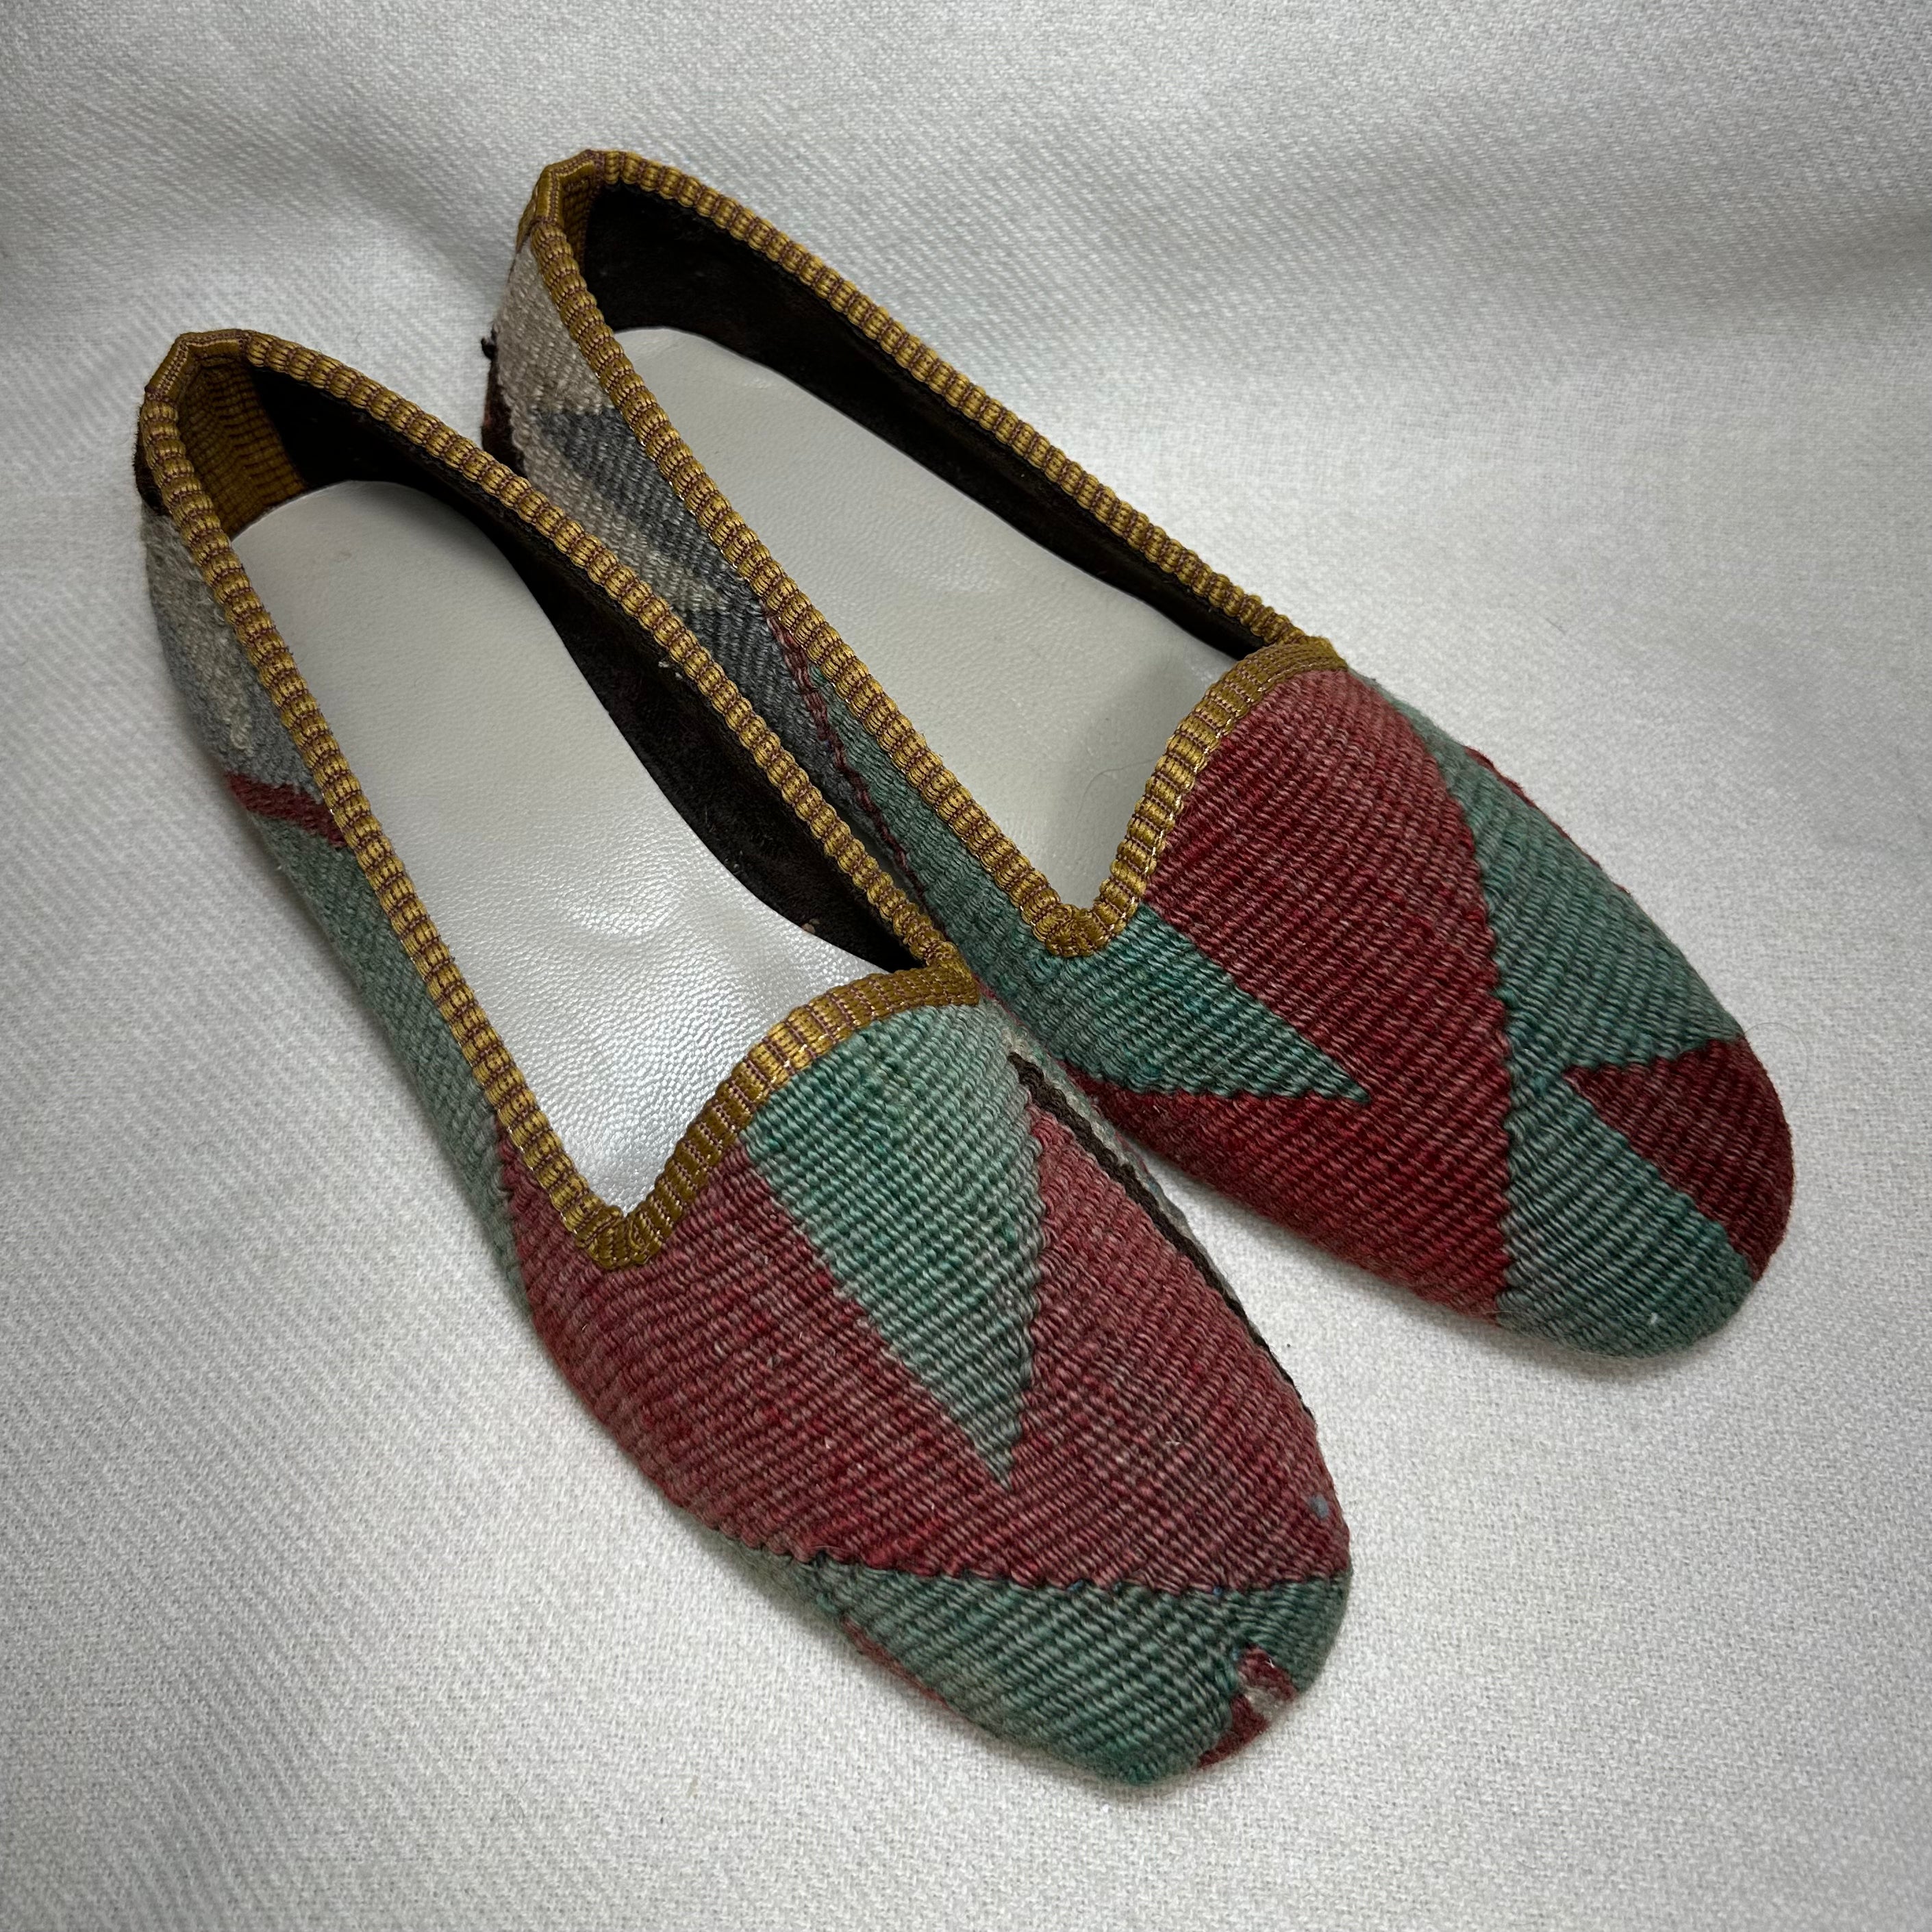 Harlequin Kilim in fall colors and green